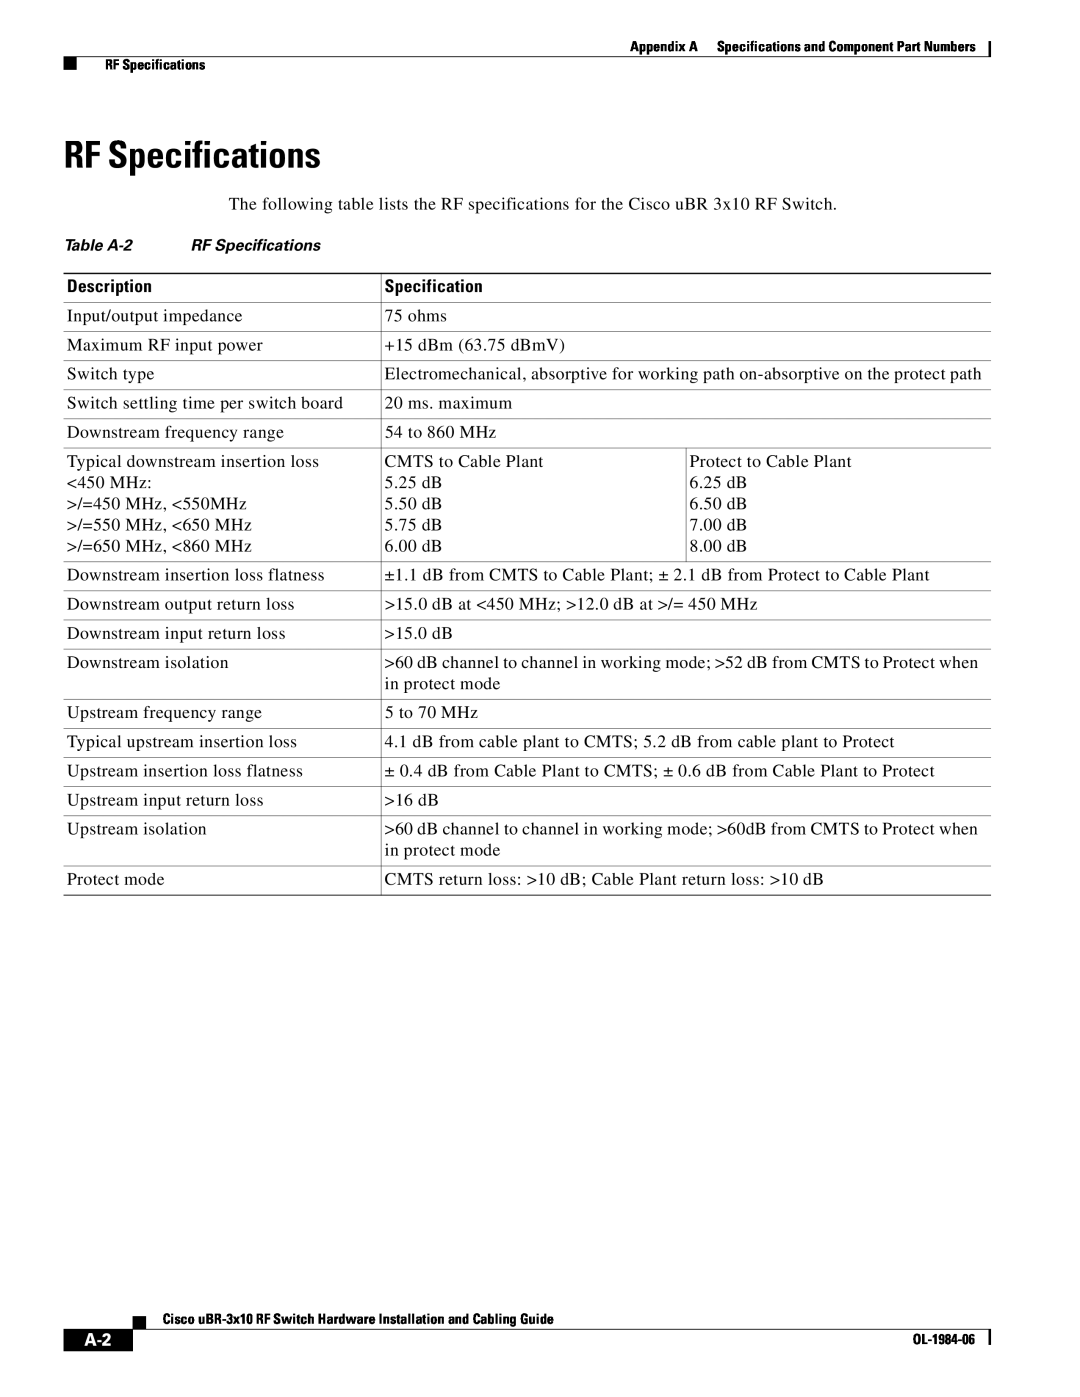 Cisco Systems UBR-3X10 manual RF Specifications 